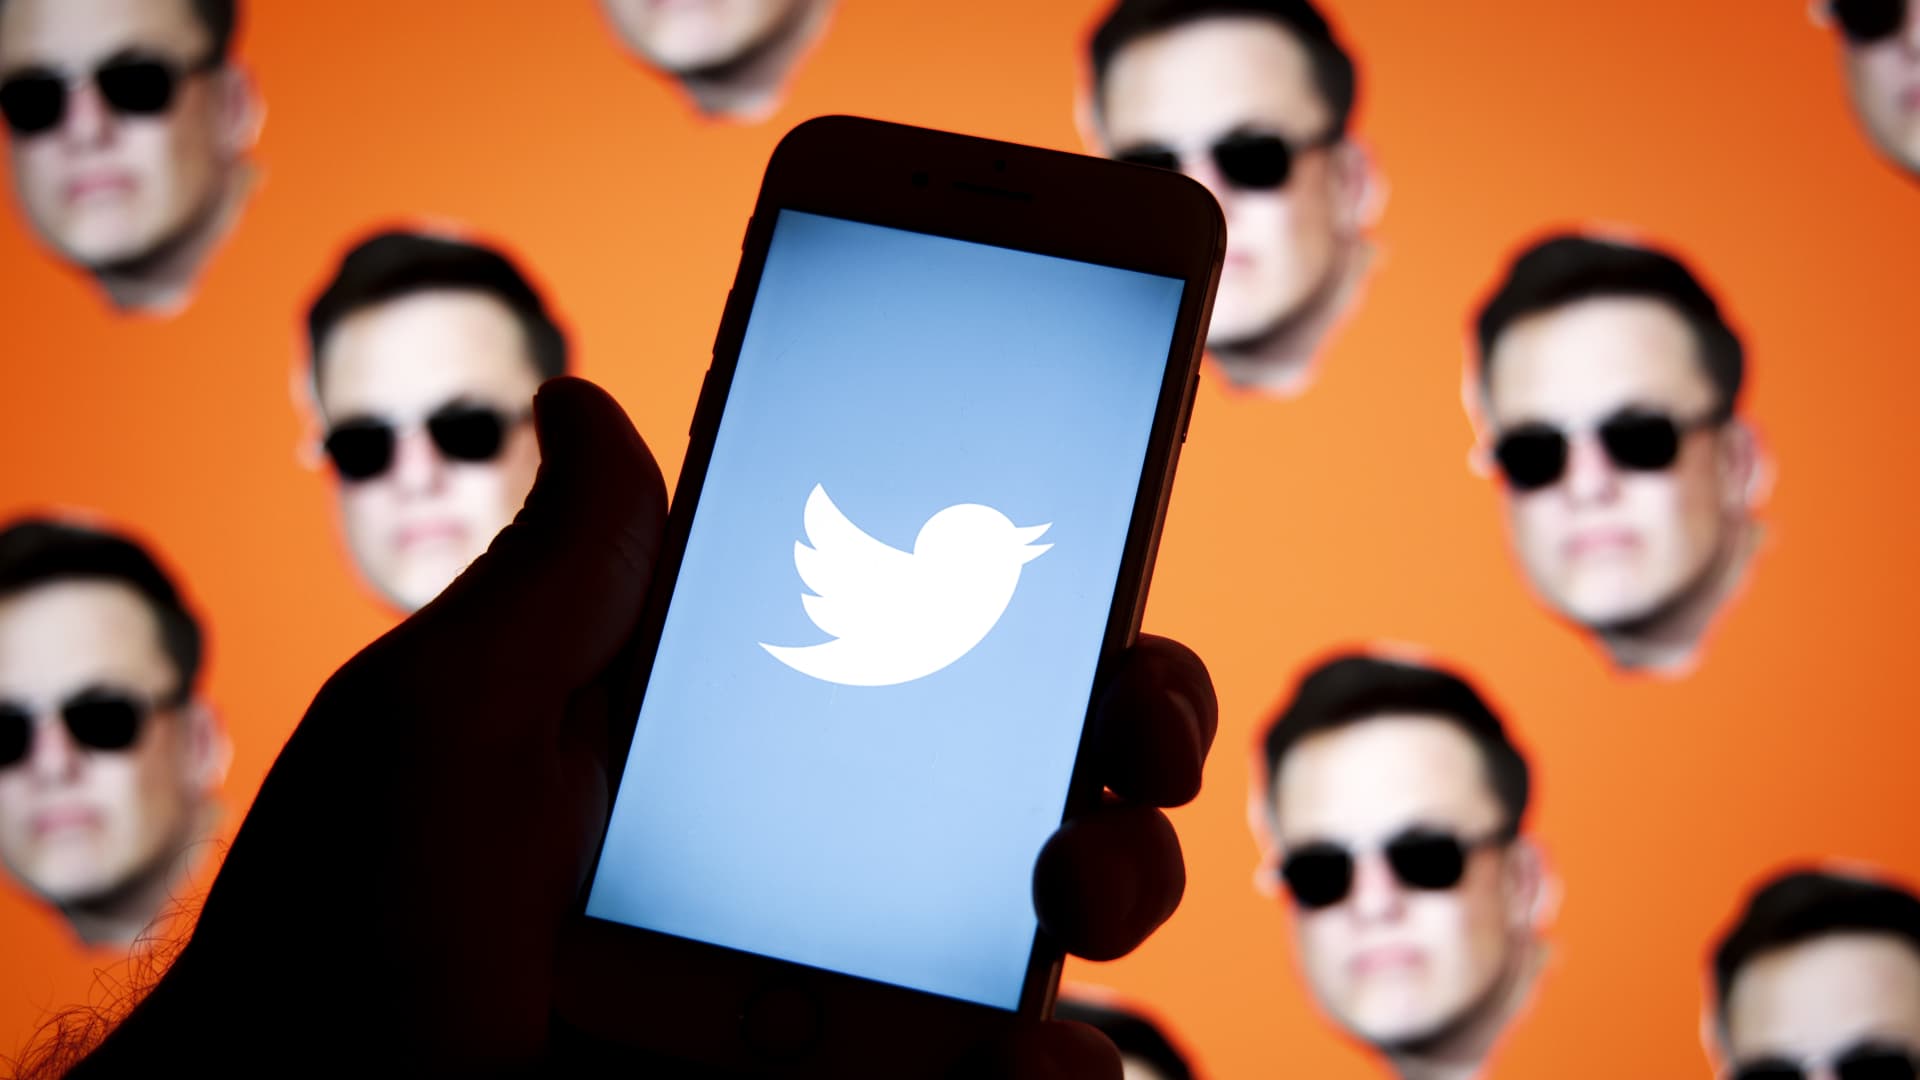 Ad giant IPG advises brands to pause Twitter spending after Musk takeover